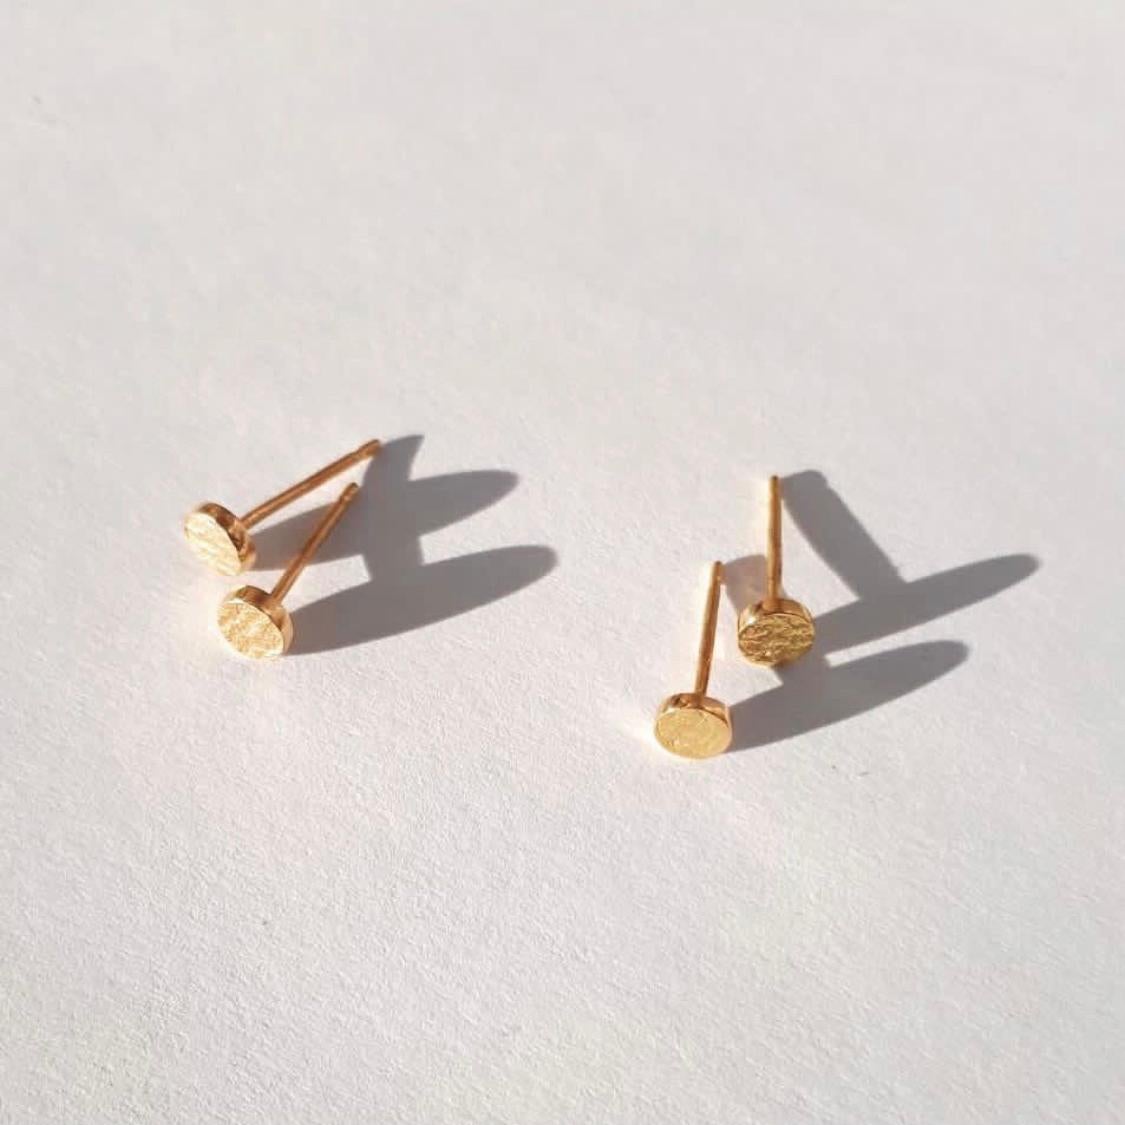 These classic gold stud earrings have a shimmering texture and high-polished edges to add a hint of shine.  Crafted in solid 9-carat gold with a post and butterfly closure. 

Handmade in London.  